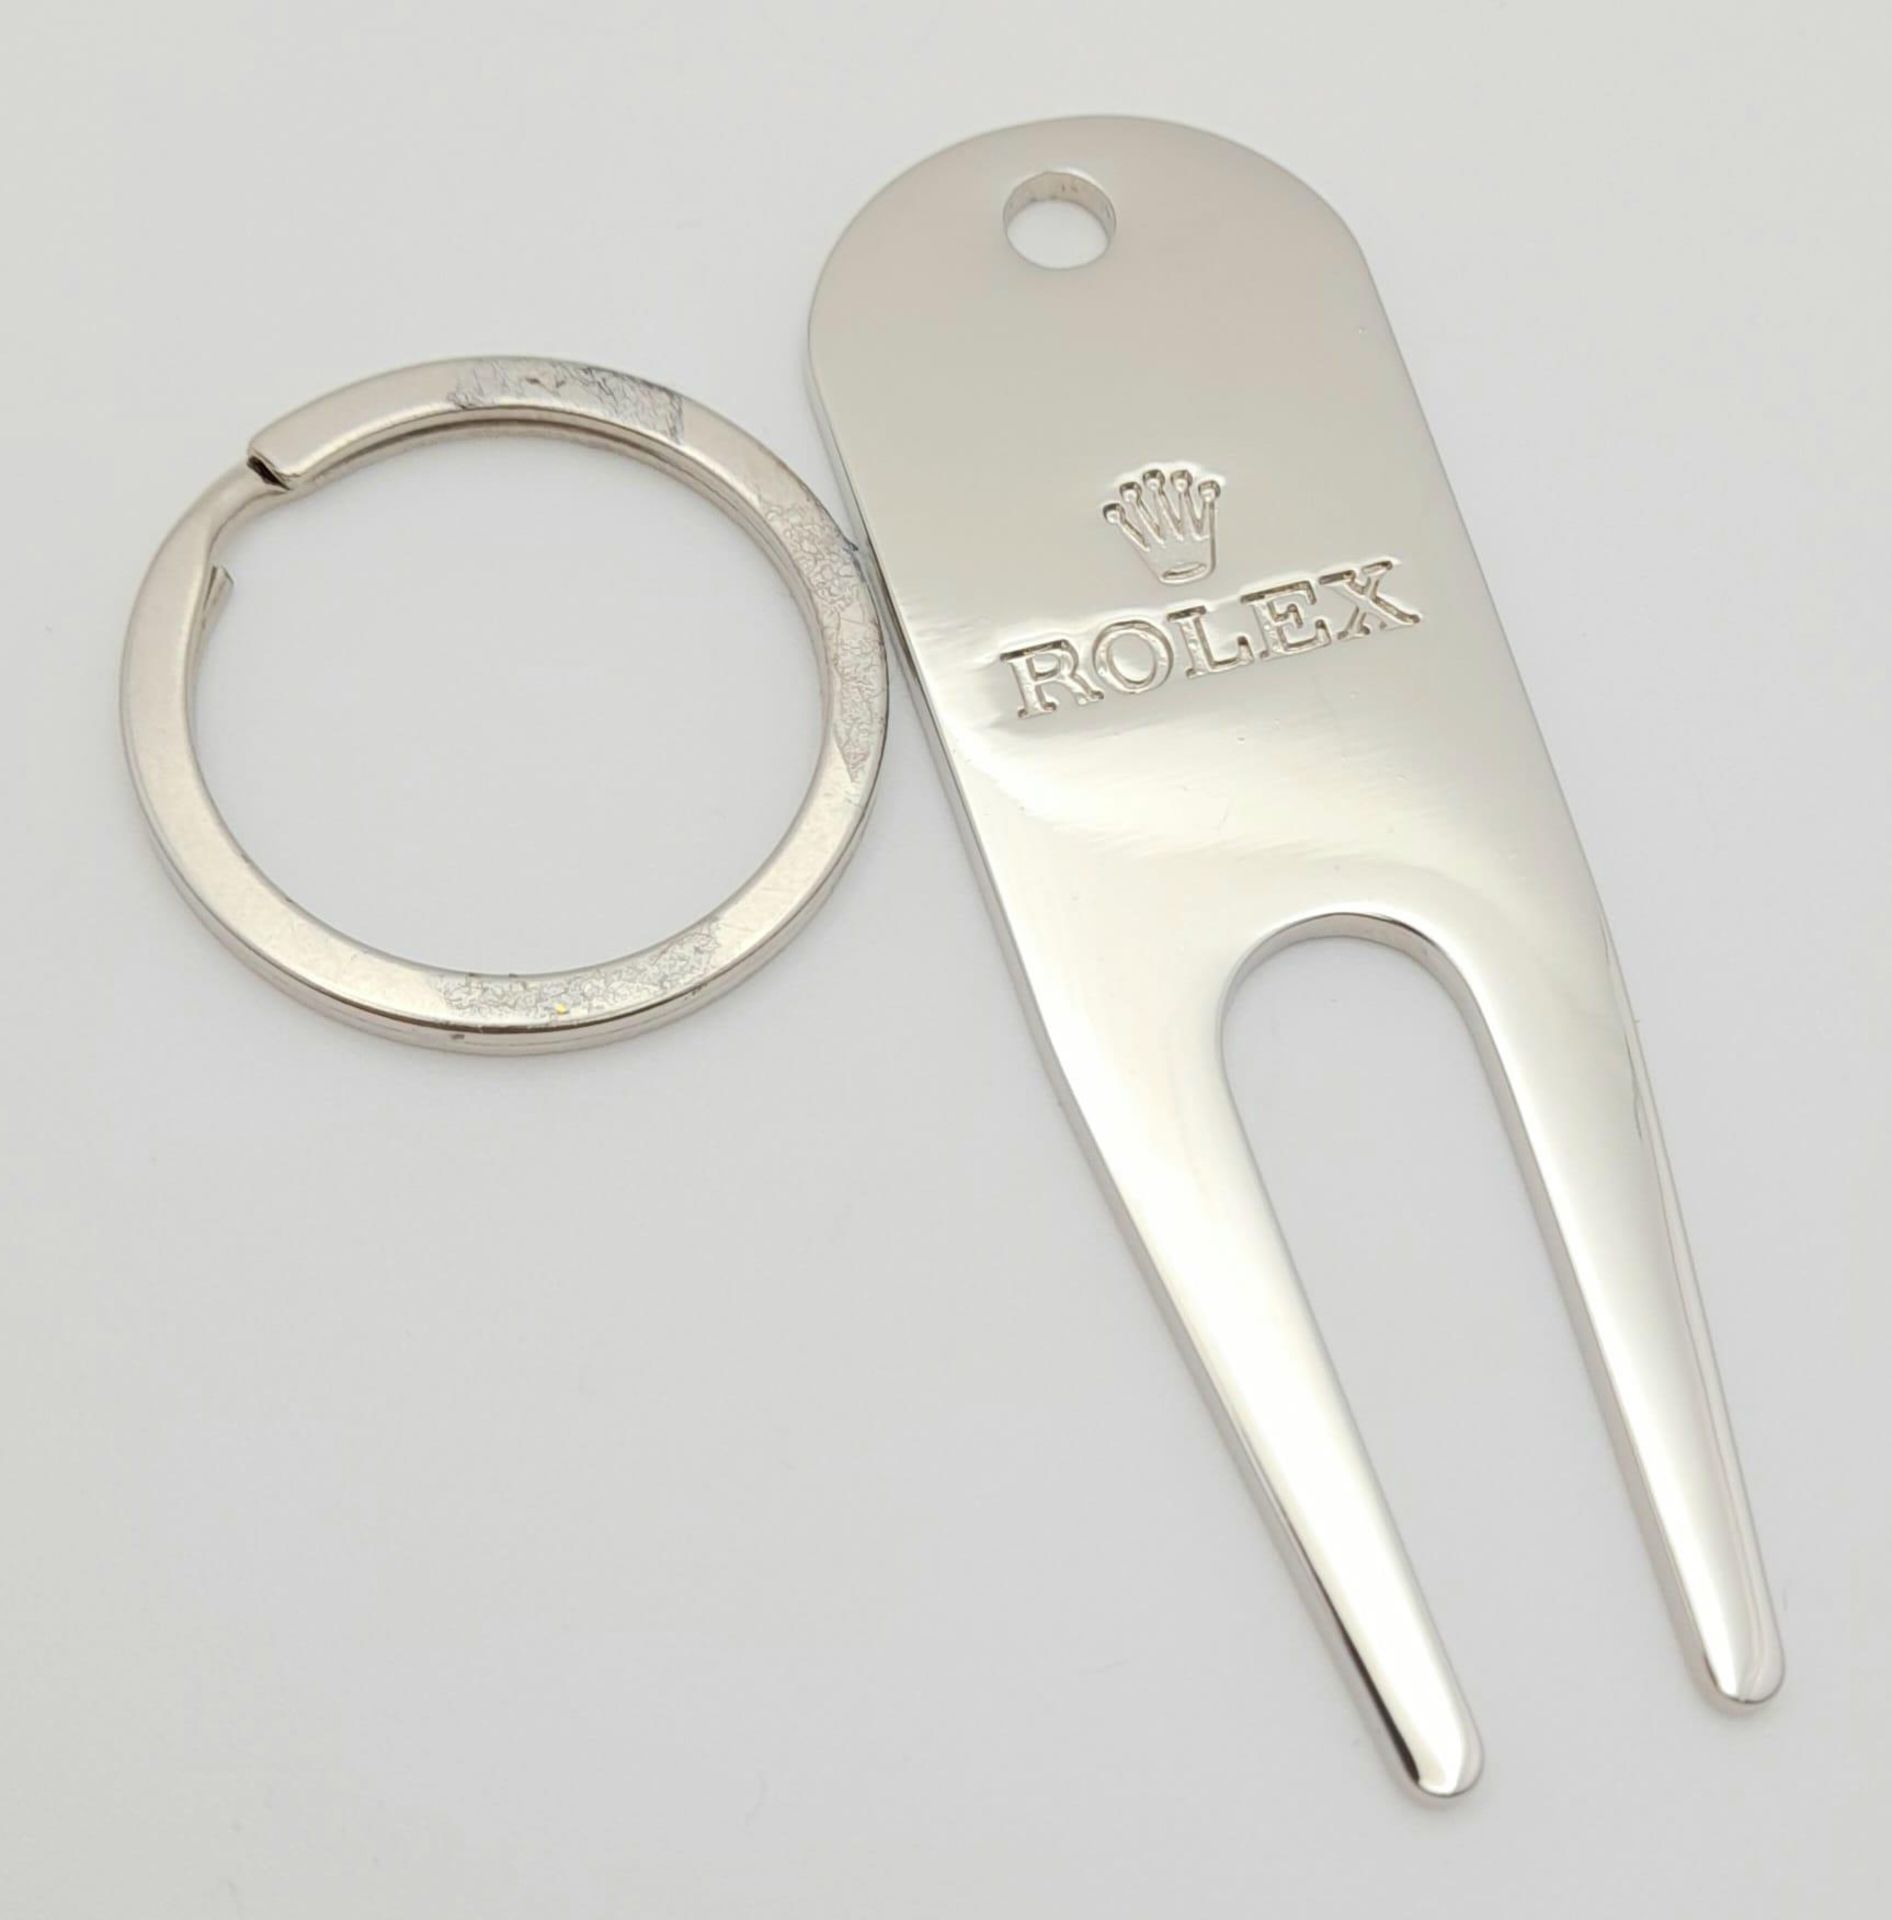 A Rolex Branded Putting Green Divot Repair Tool. Comes with a keyring attachment. In as new